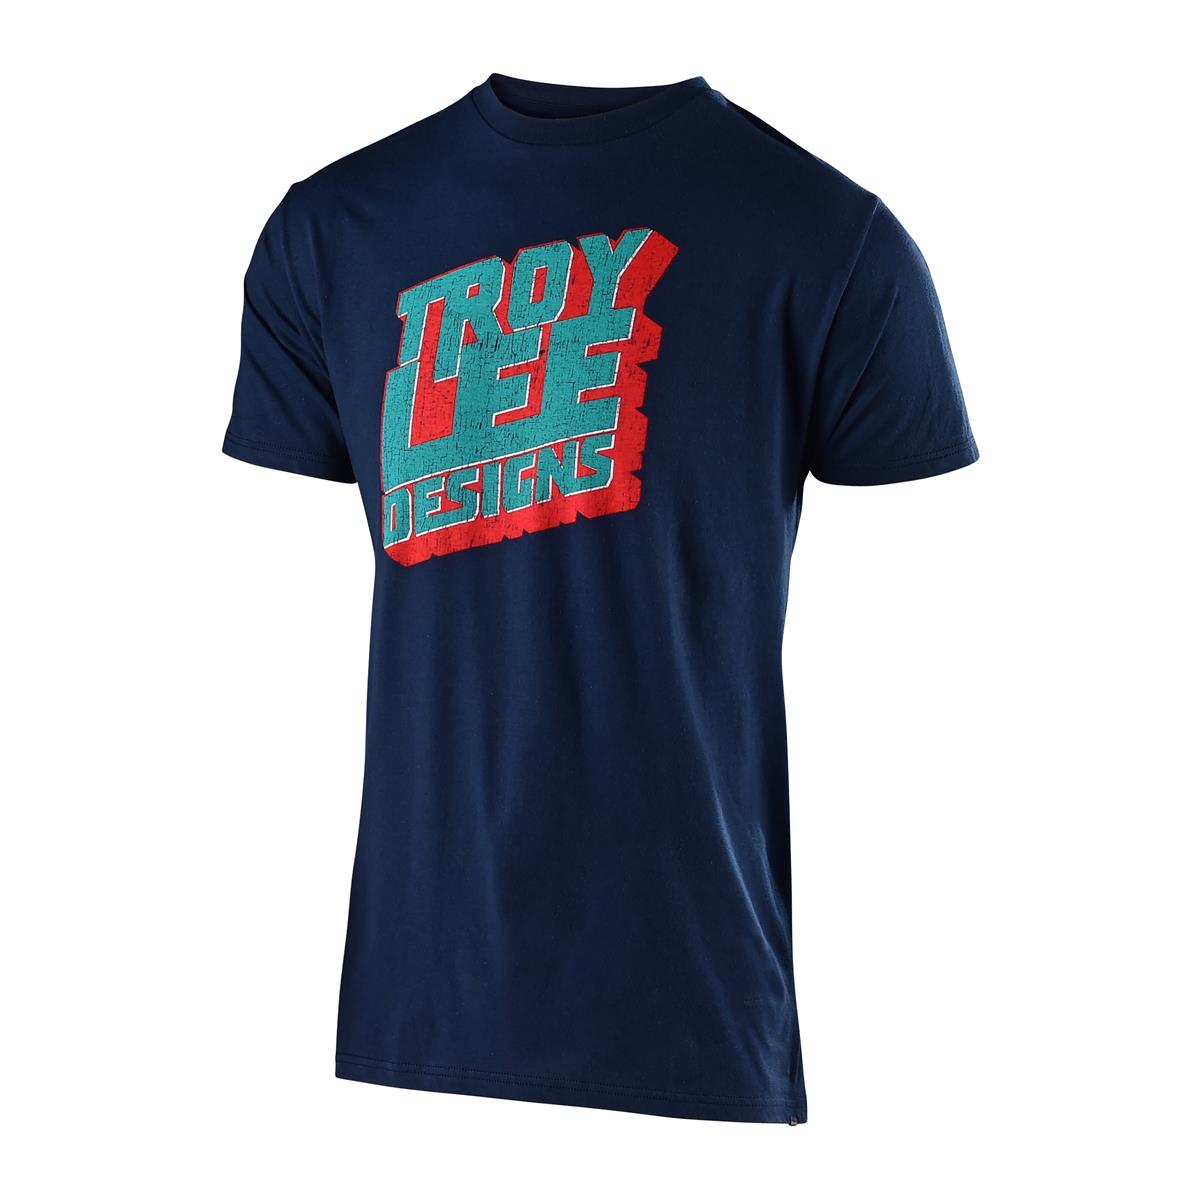 Troy Lee Designs T-Shirt Block Party New Navy